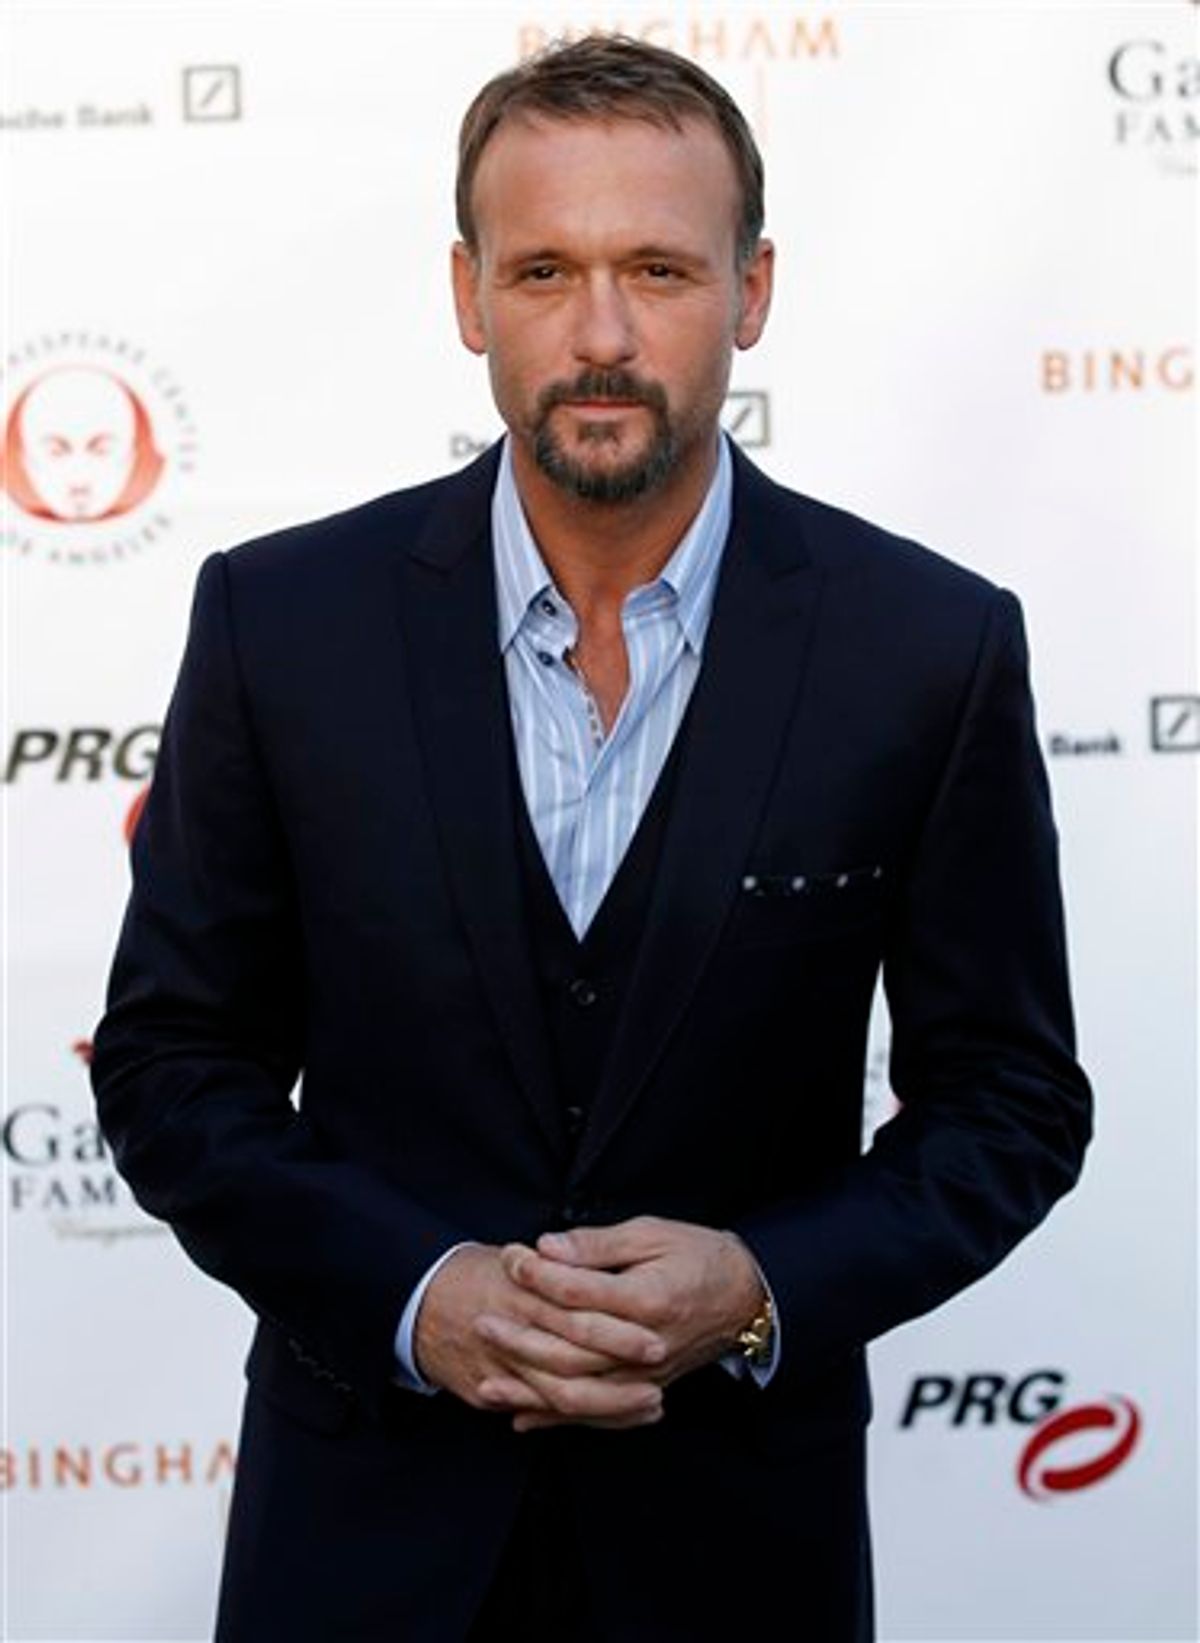 FILE - In this May 9, 2011 file photo, actor and musician Tim McGraw arrives at The Shakespeare Center of Los Angeles' 21st Annual Simply Shakespeare Fundraiser in Los Angeles.  Curb Records  has filed a breach-of-contract lawsuit against McGraw, claiming the country superstar failed to provide a fifth and final album under their deal that met contractual obligations by an April deadline.   (AP Photo/Matt Sayles, file) (AP)